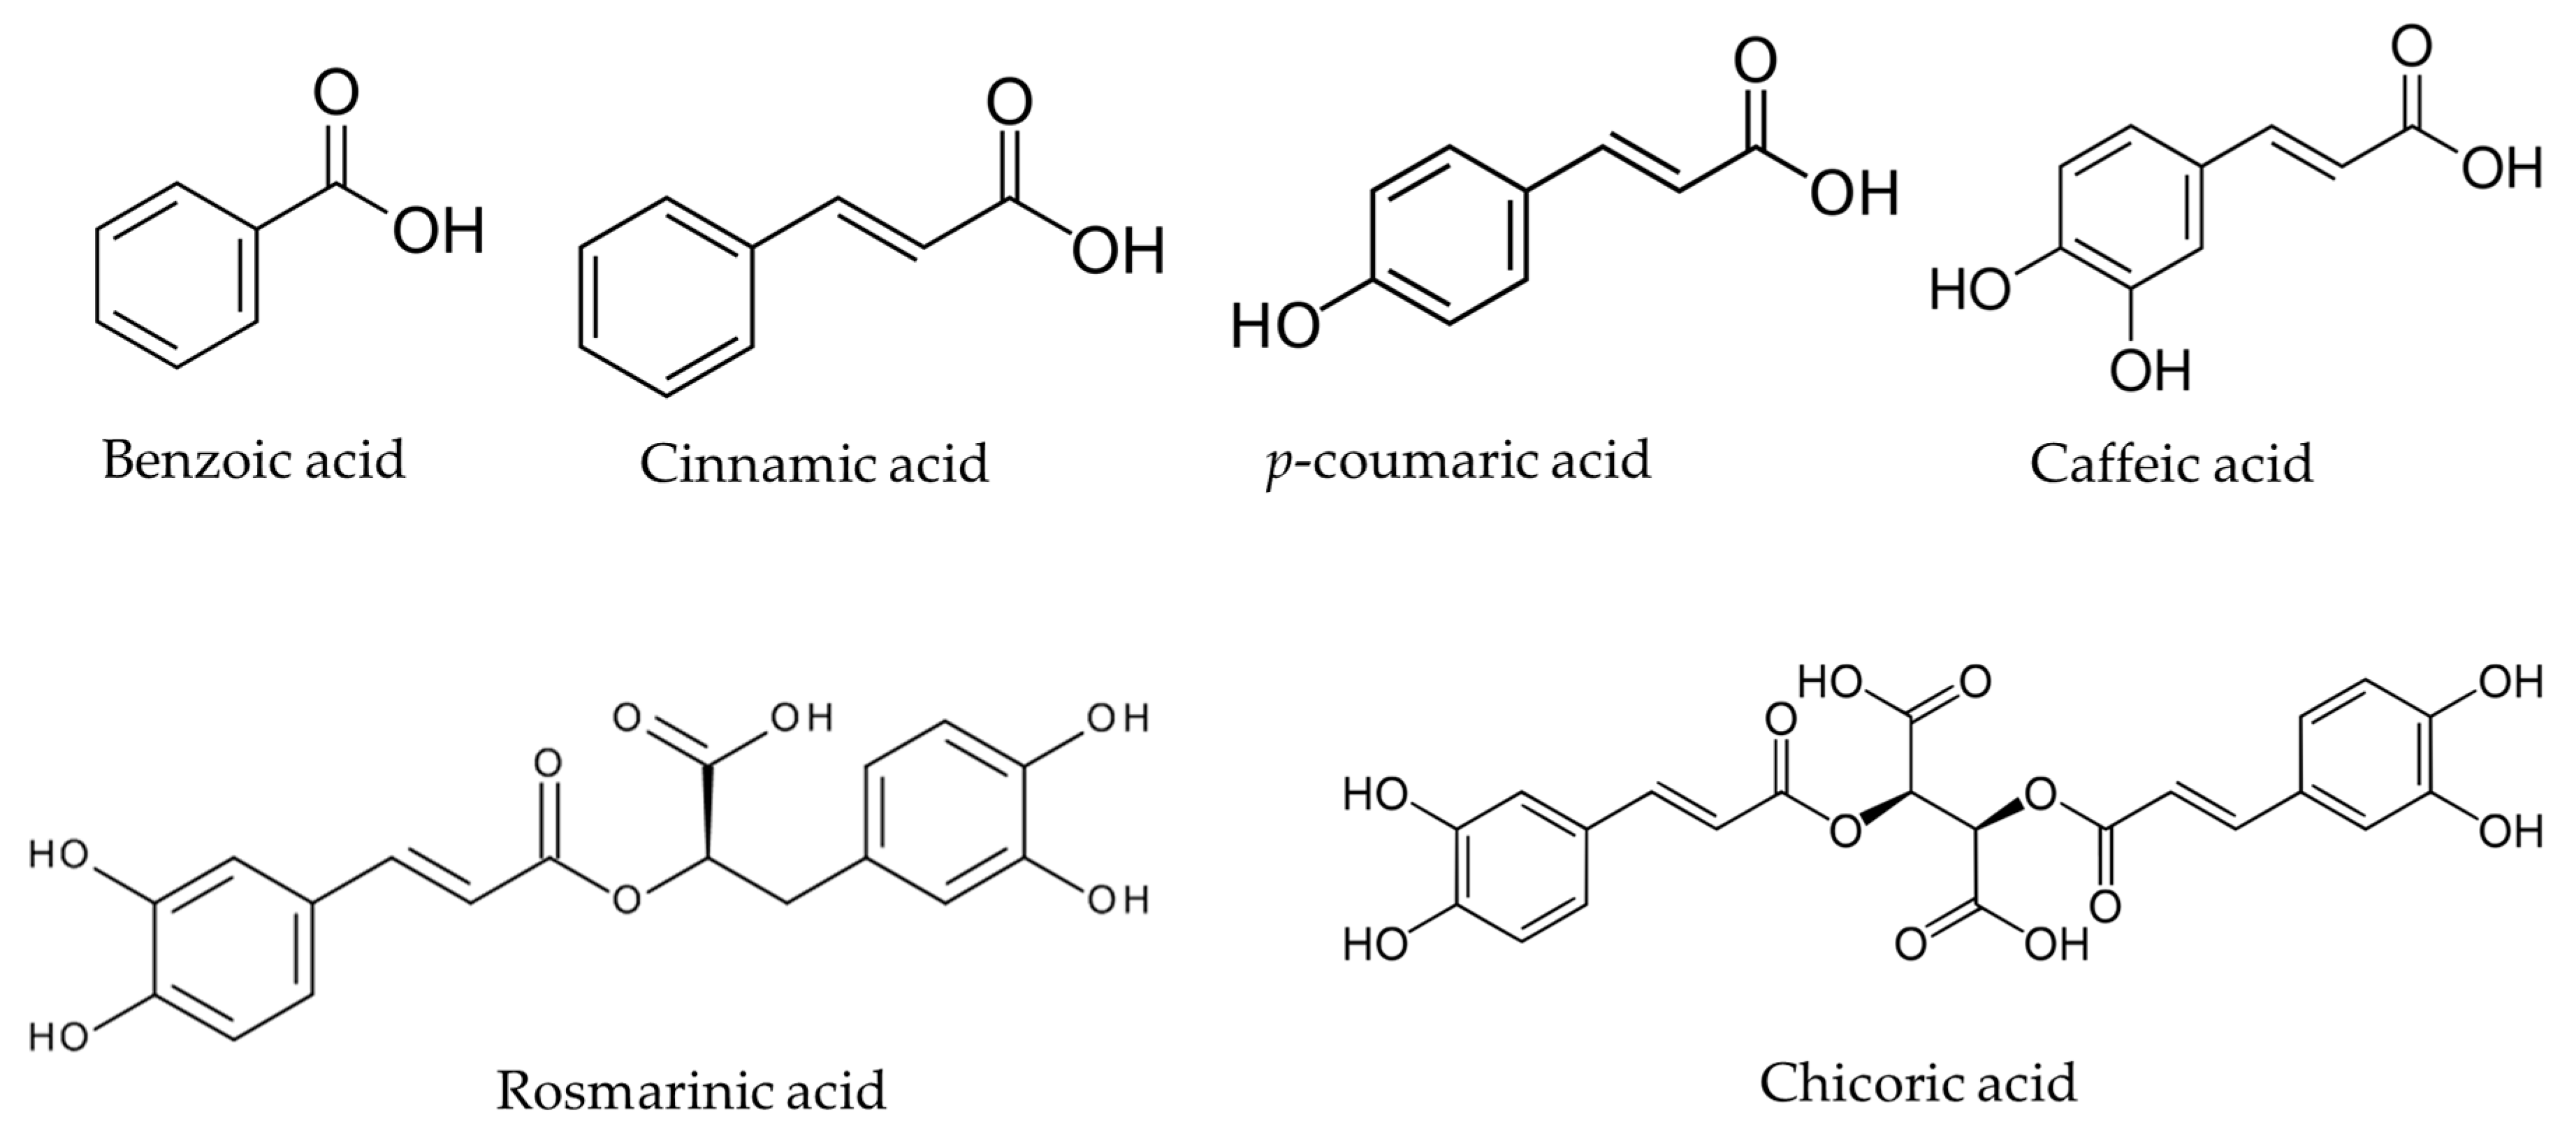 Materials | Free Full-Text | Biologically Active Compounds of Plants:  Structure-Related Antioxidant, Microbiological and Cytotoxic Activity of  Selected Carboxylic Acids | HTML